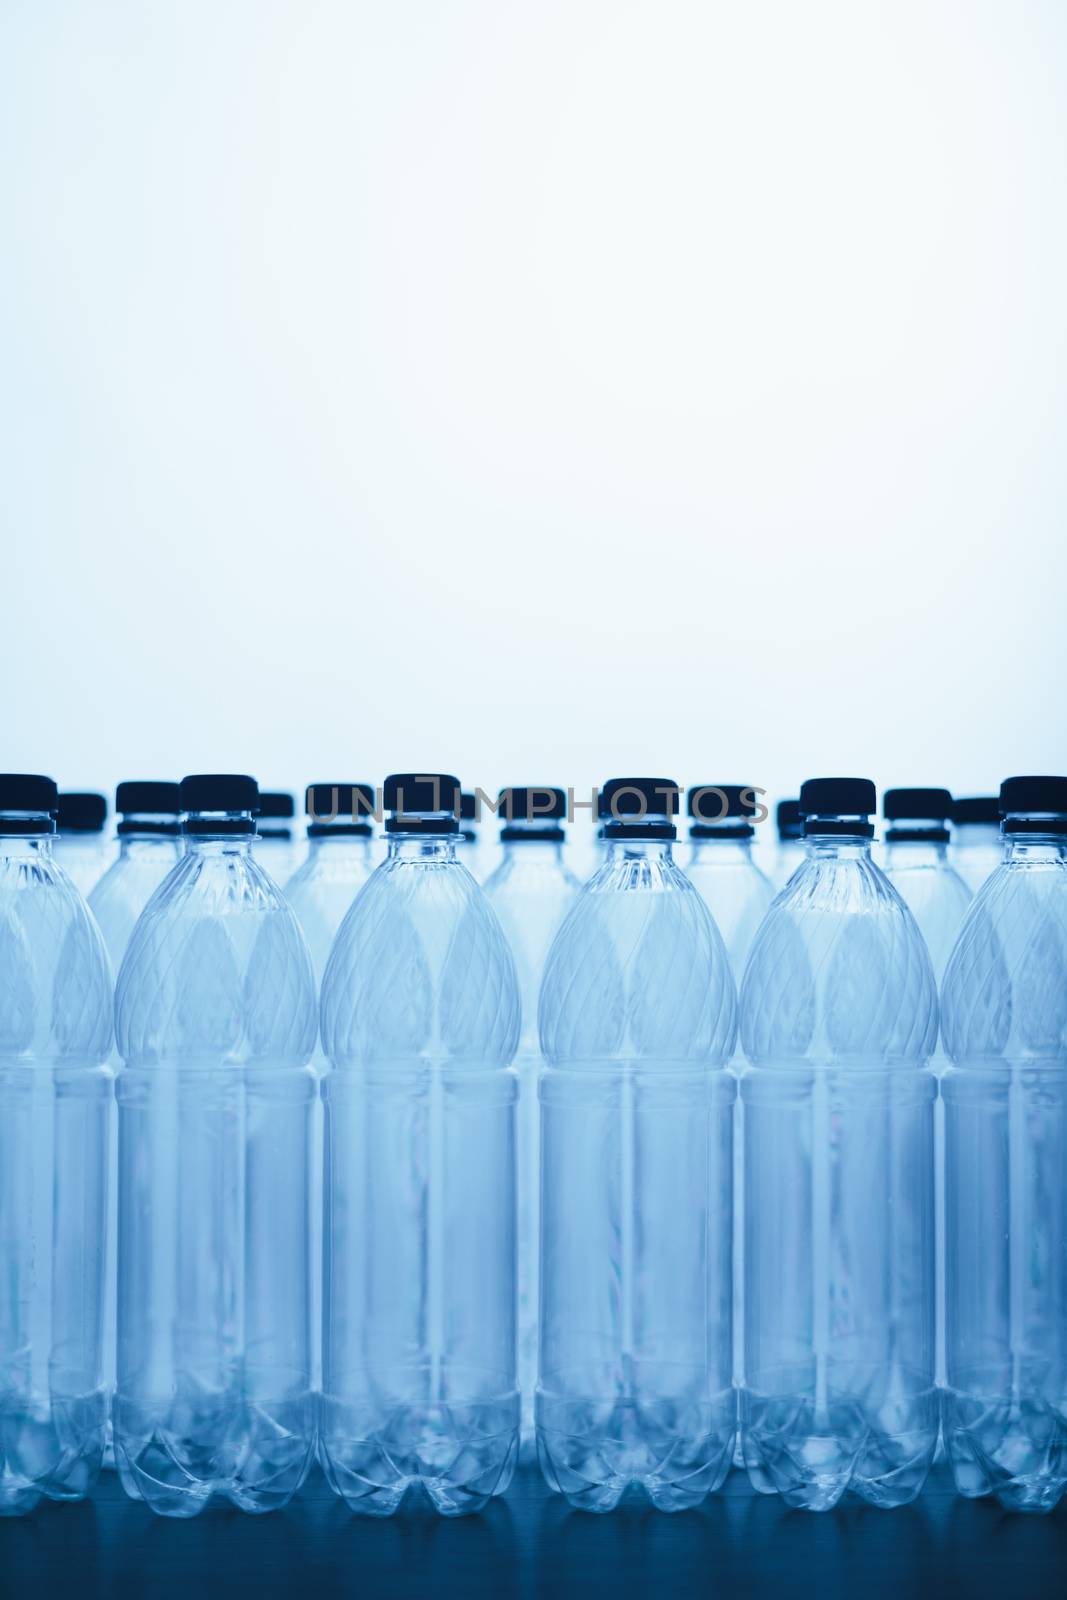 empty plastic bottle silhouettes on blue background by nikkytok